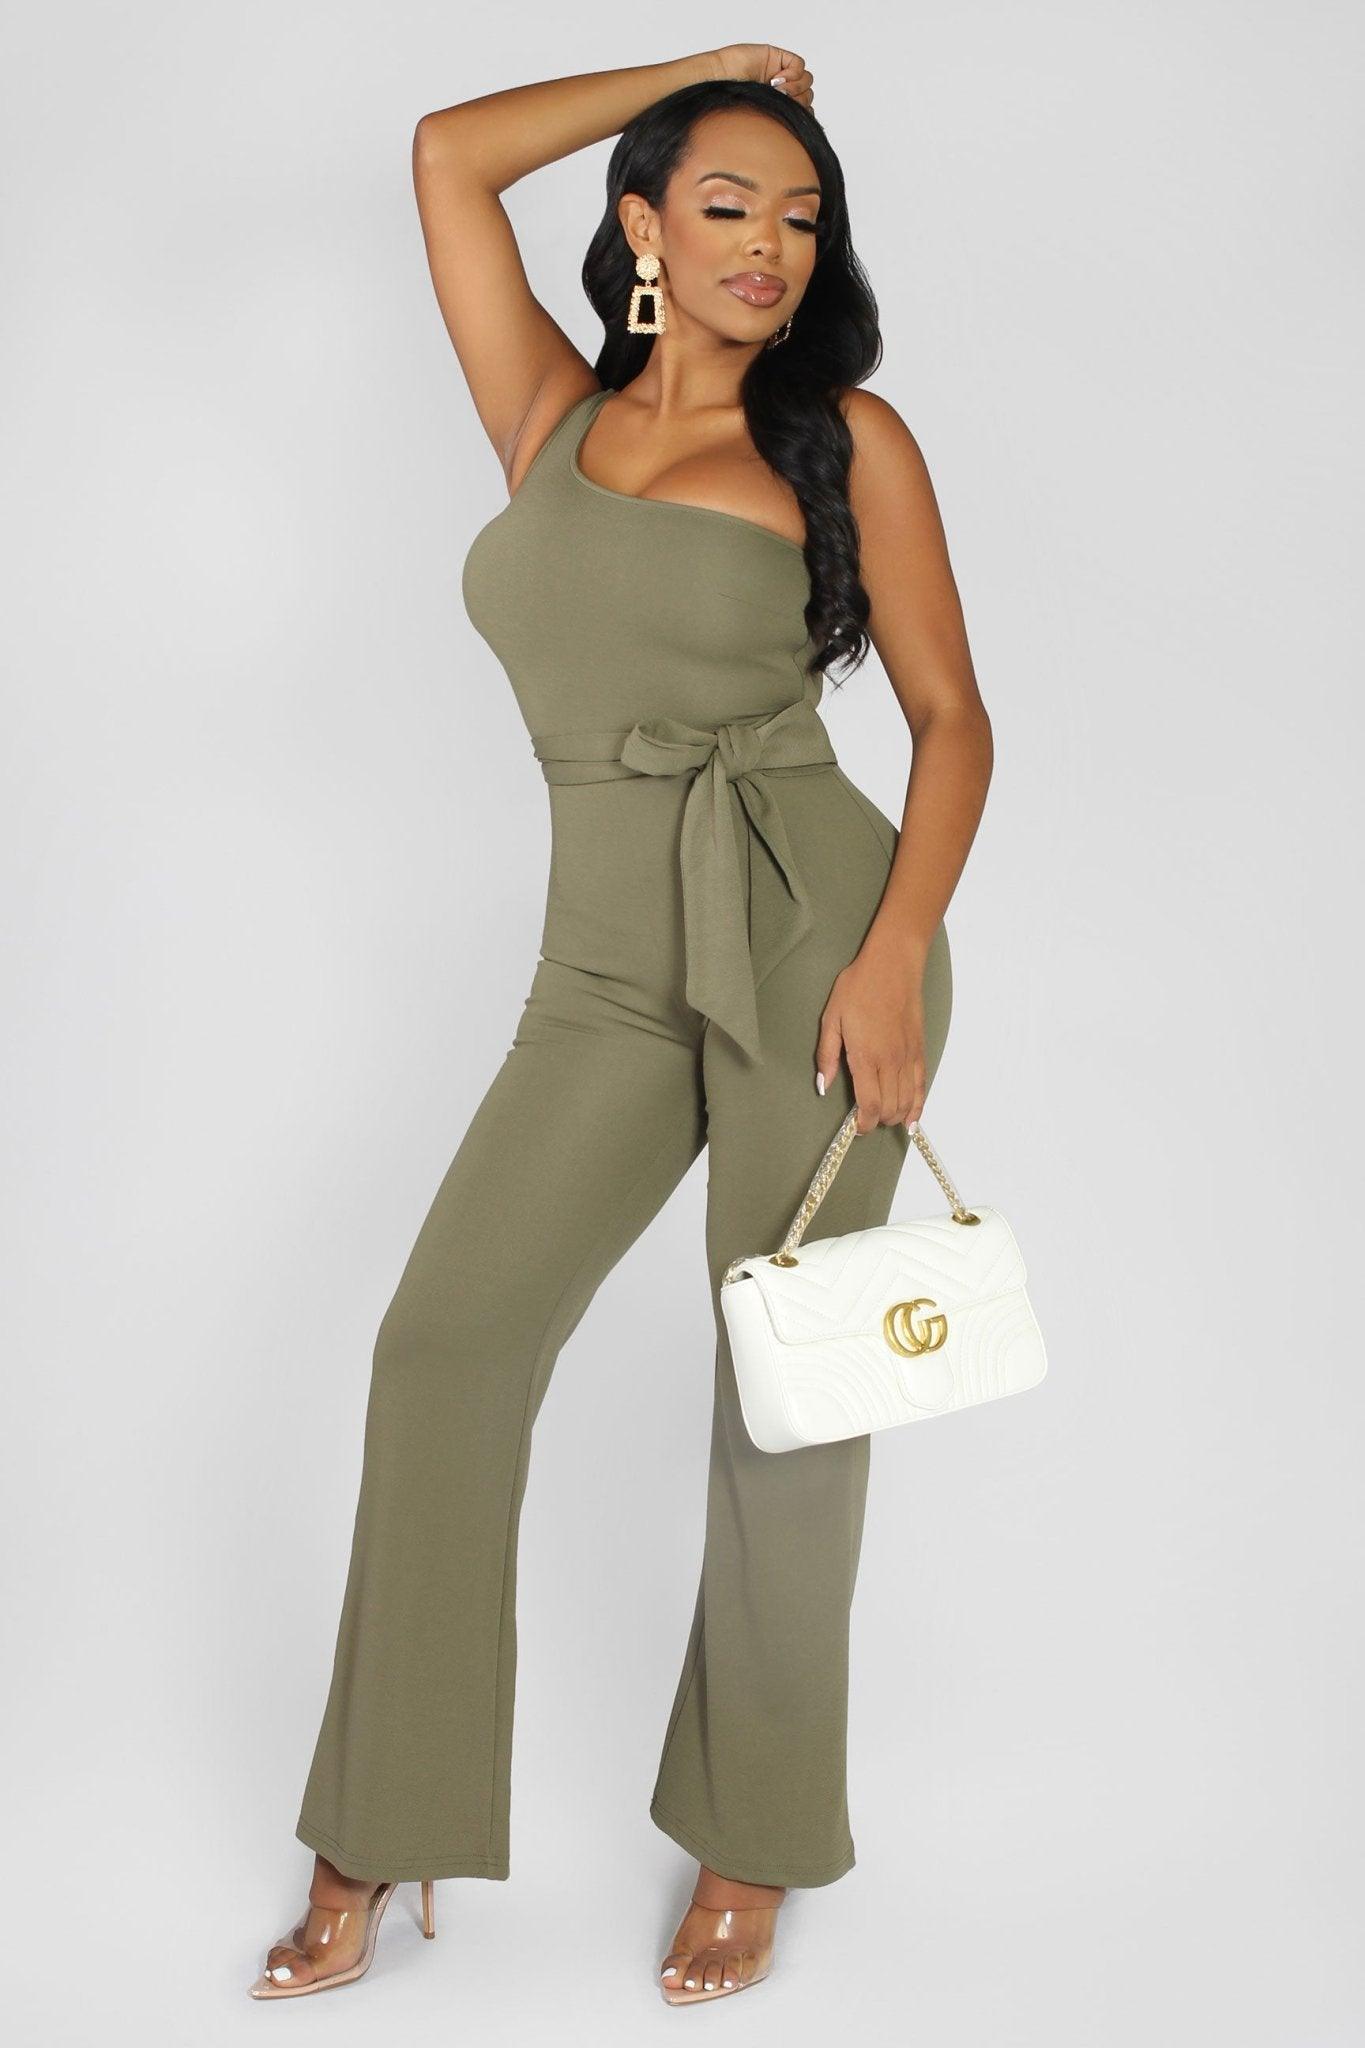 Amoura One Shoulder Jumpsuit - MY SEXY STYLES